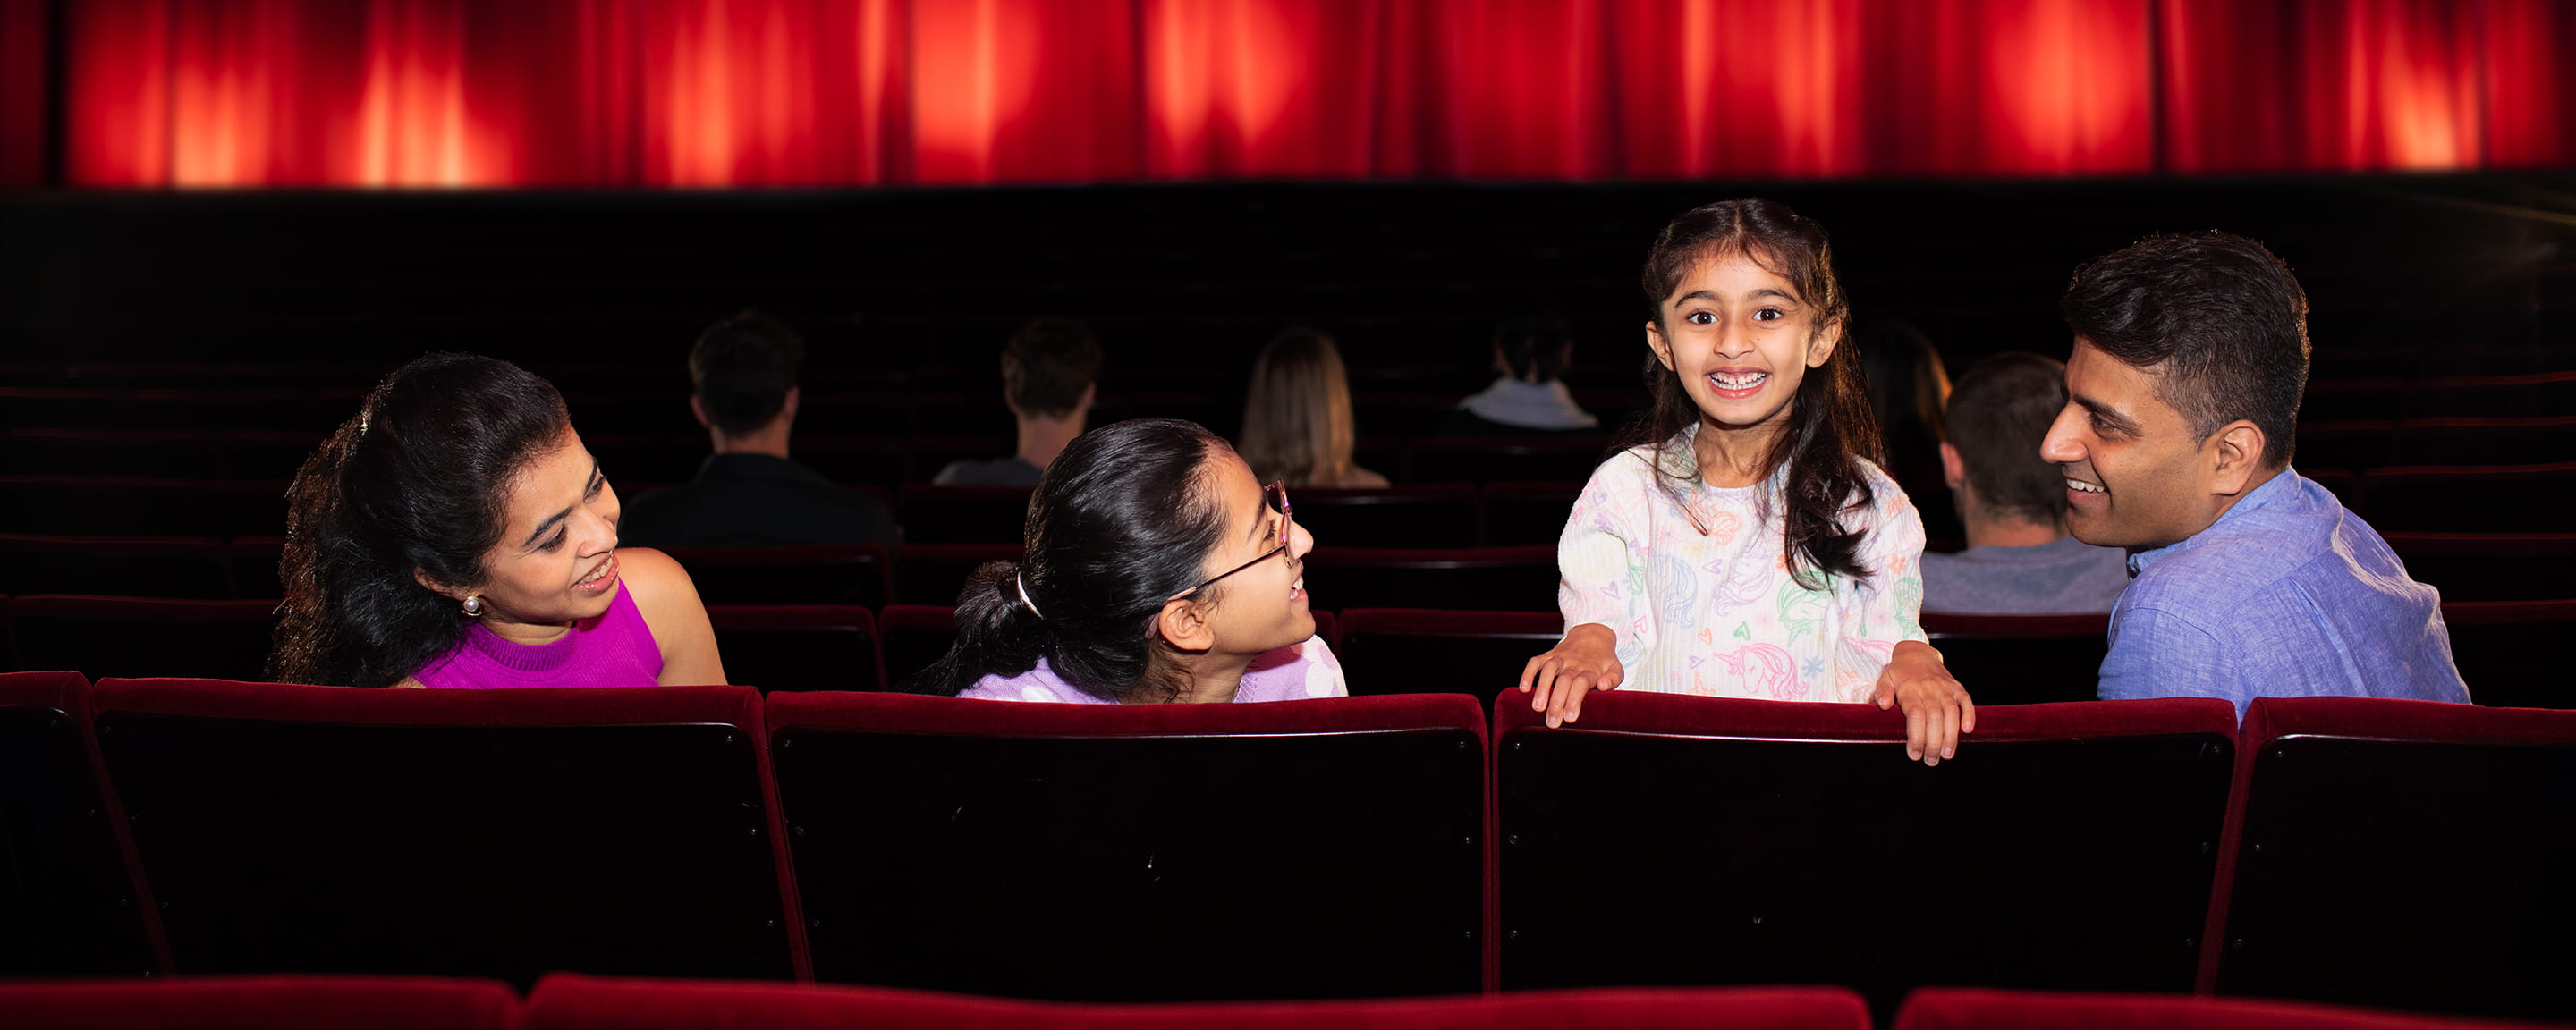 Kids sitting in the audience of a theatre